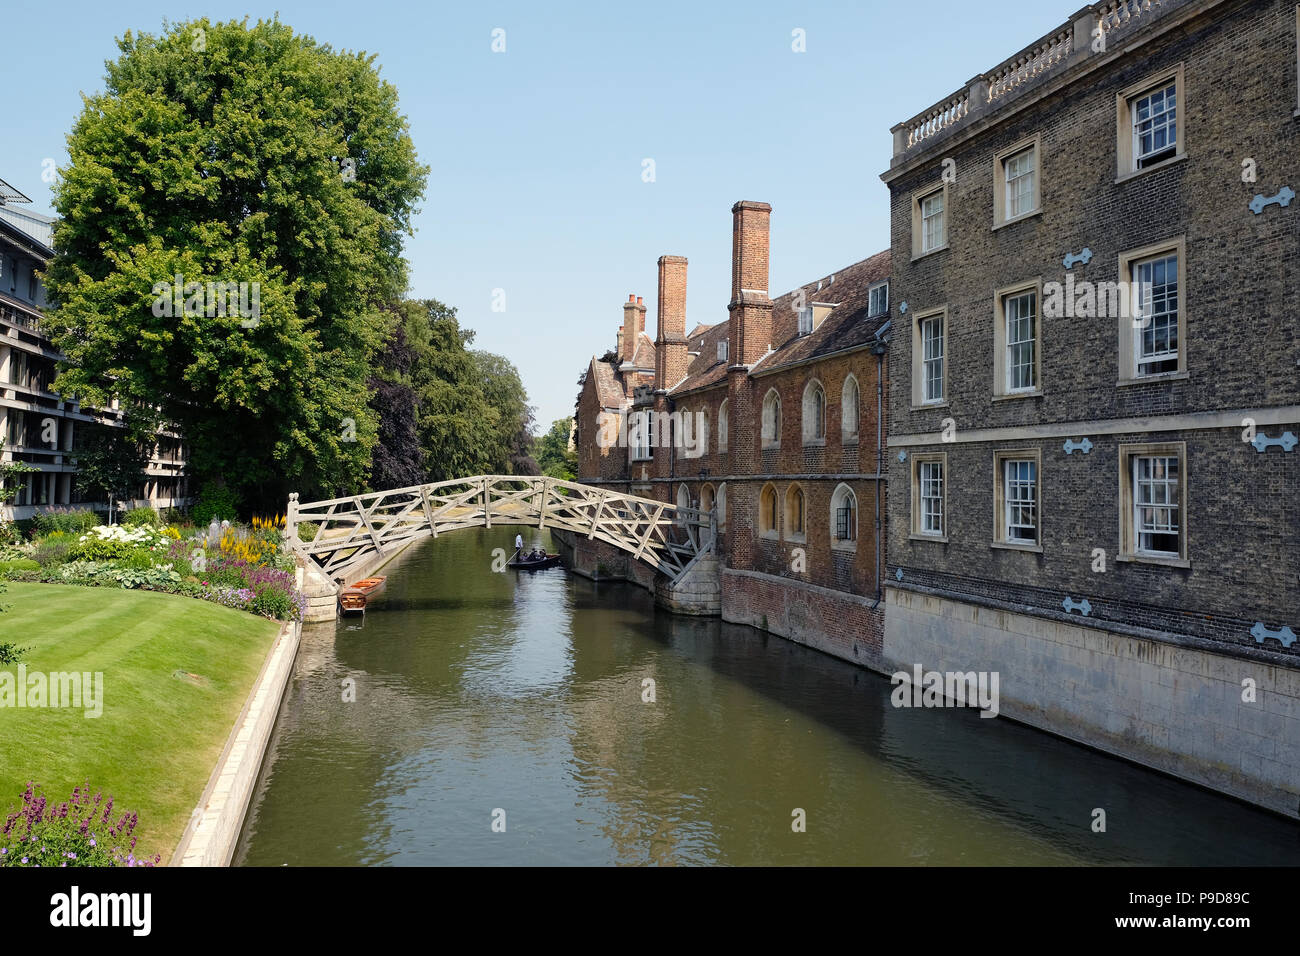 The Mathematical Bridge is the popular name of a wooden footbridge in the southwest of central Cambridge, United Kingdom. It bridges the River Cam about one hundred feet northwest of Silver Street Bridge and connects two parts of Queens' College. Its official name is simply the Wooden Bridge. Stock Photo